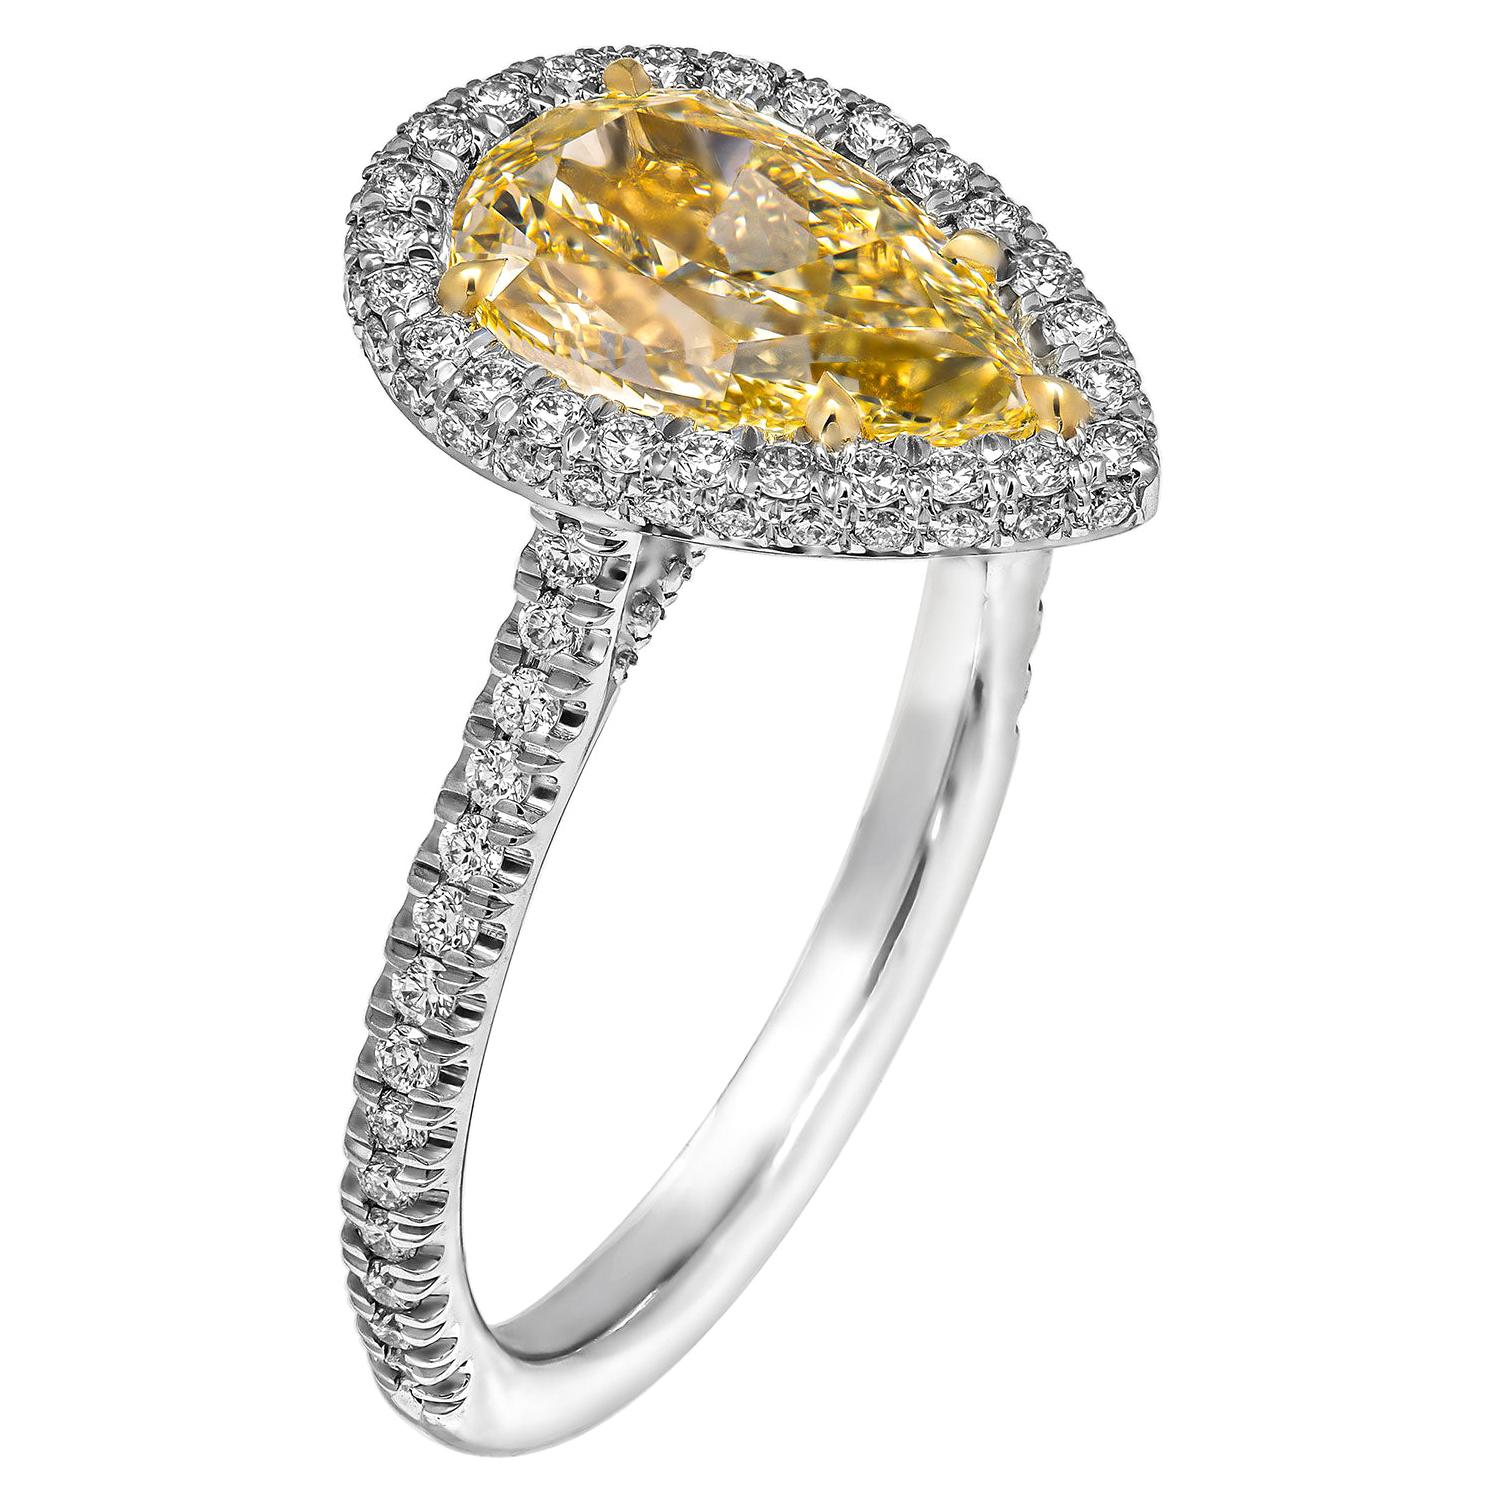 GIA Certified Cocktail Ring with 2.00 Carat Fancy Light Yellow Pear Shape